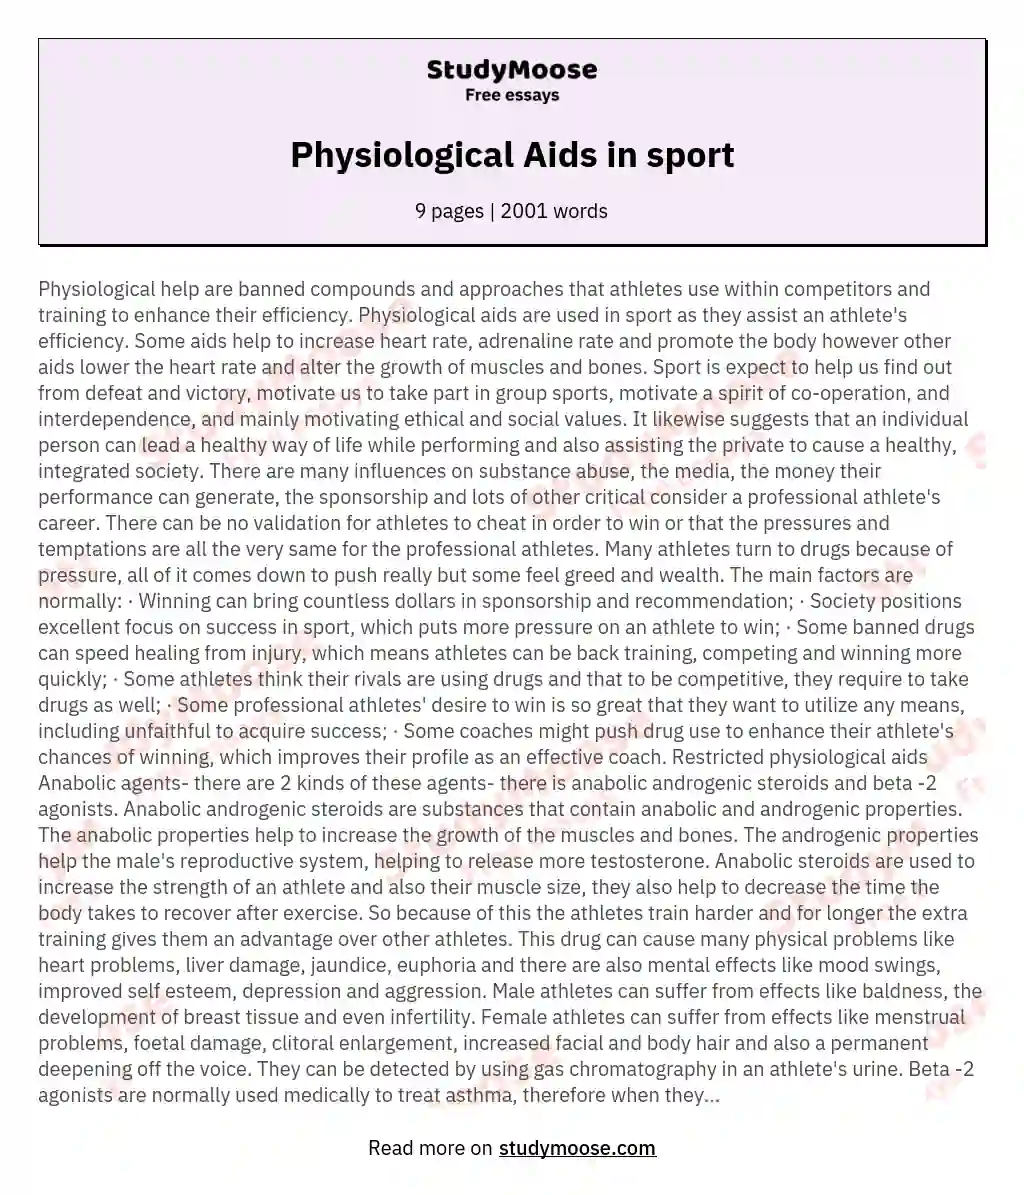 Physiological Aids in sport essay